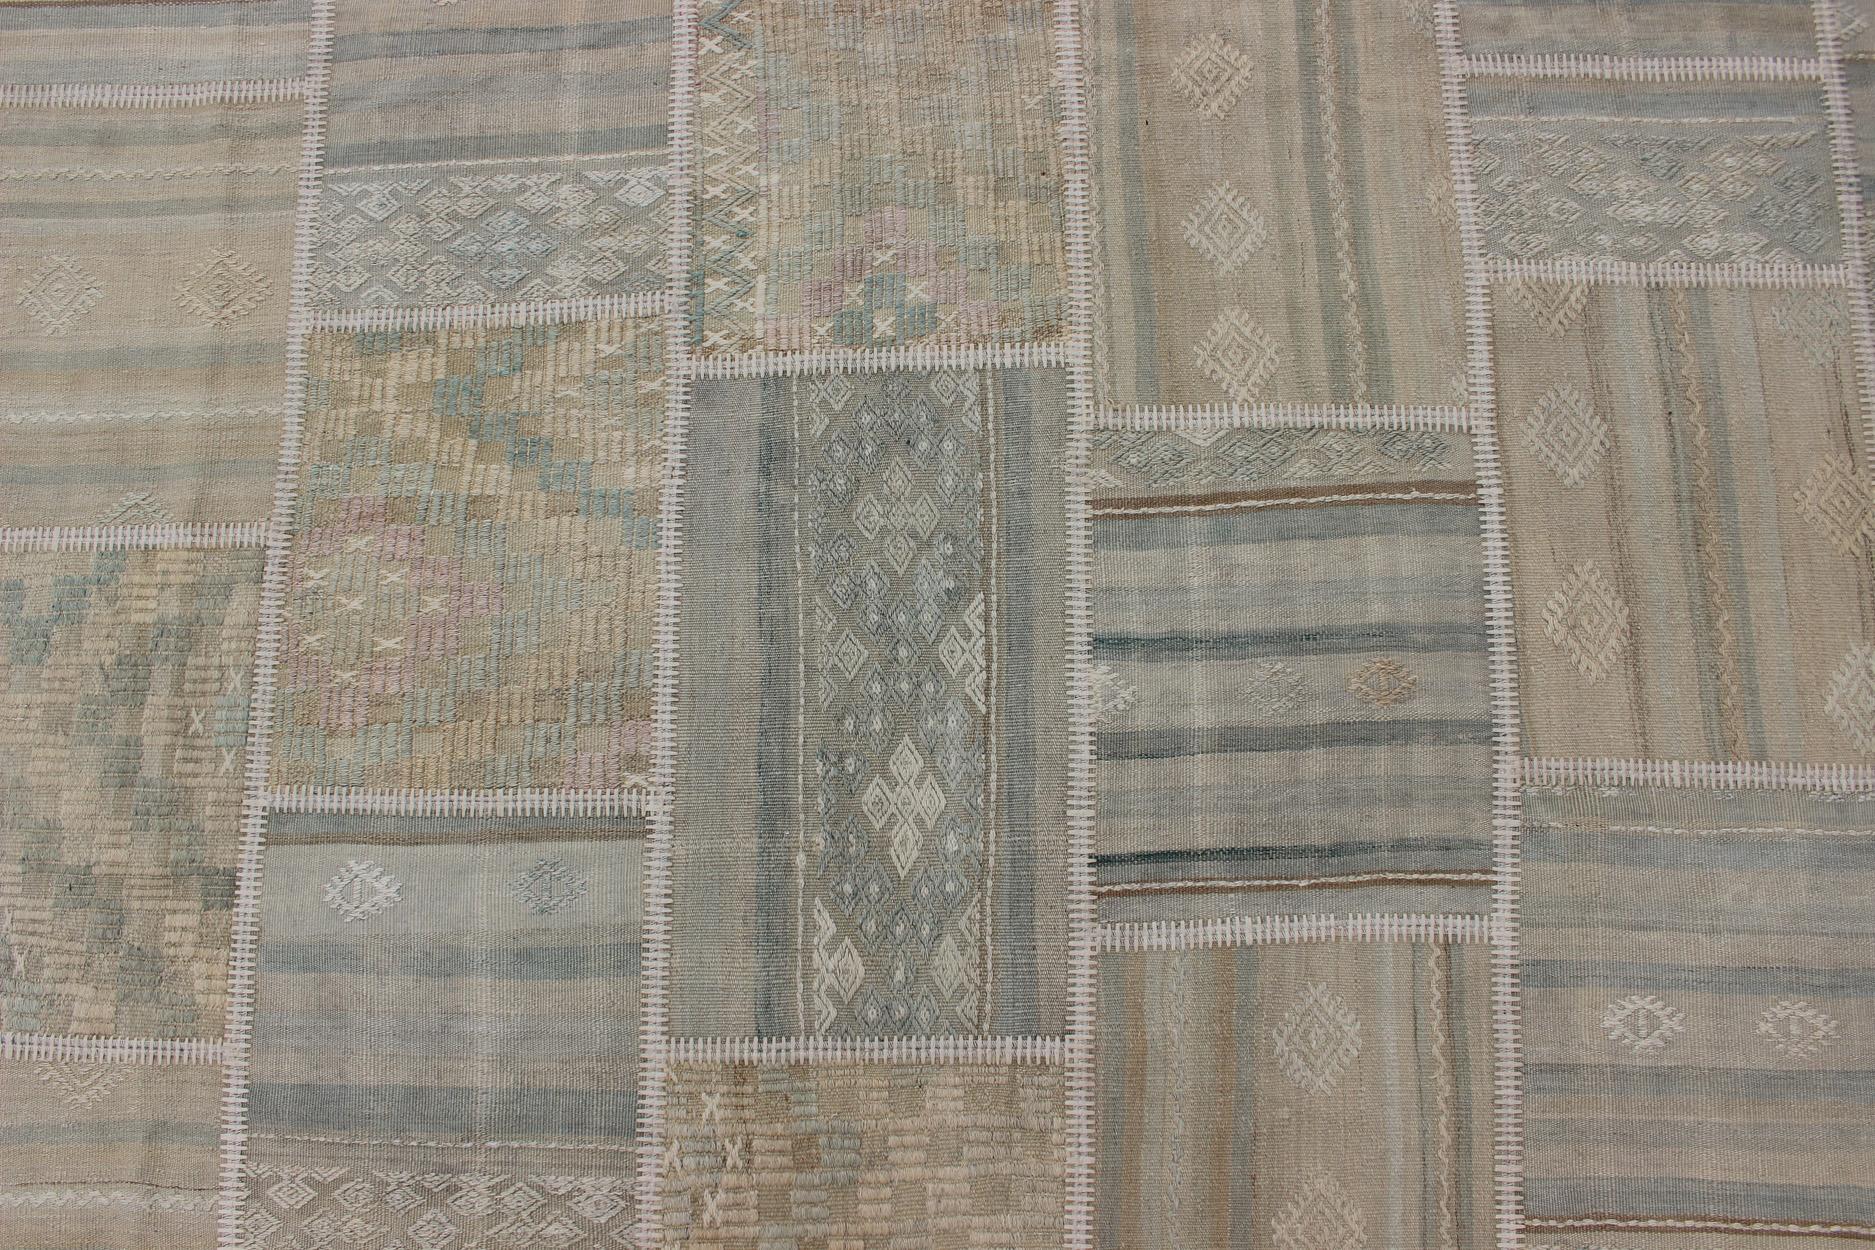 Large Turkish Kilim in Tan, Blue, Taupe, Light Green & Neutral Colors In Good Condition For Sale In Atlanta, GA